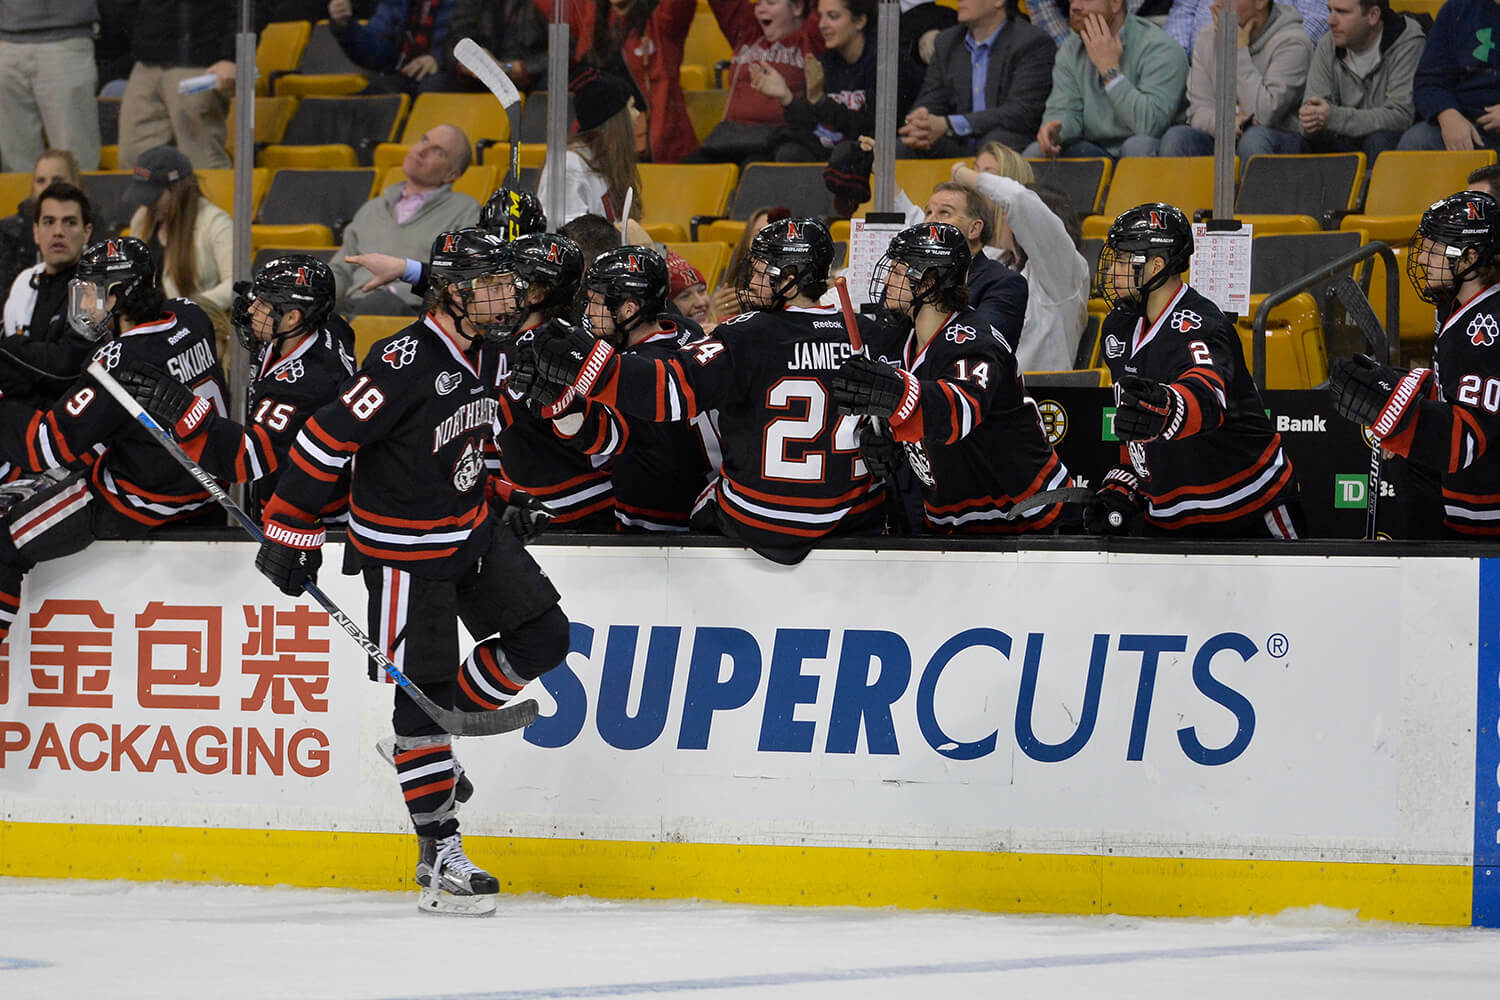 Huskies Explode on Offense to Take Beanpot Consolation